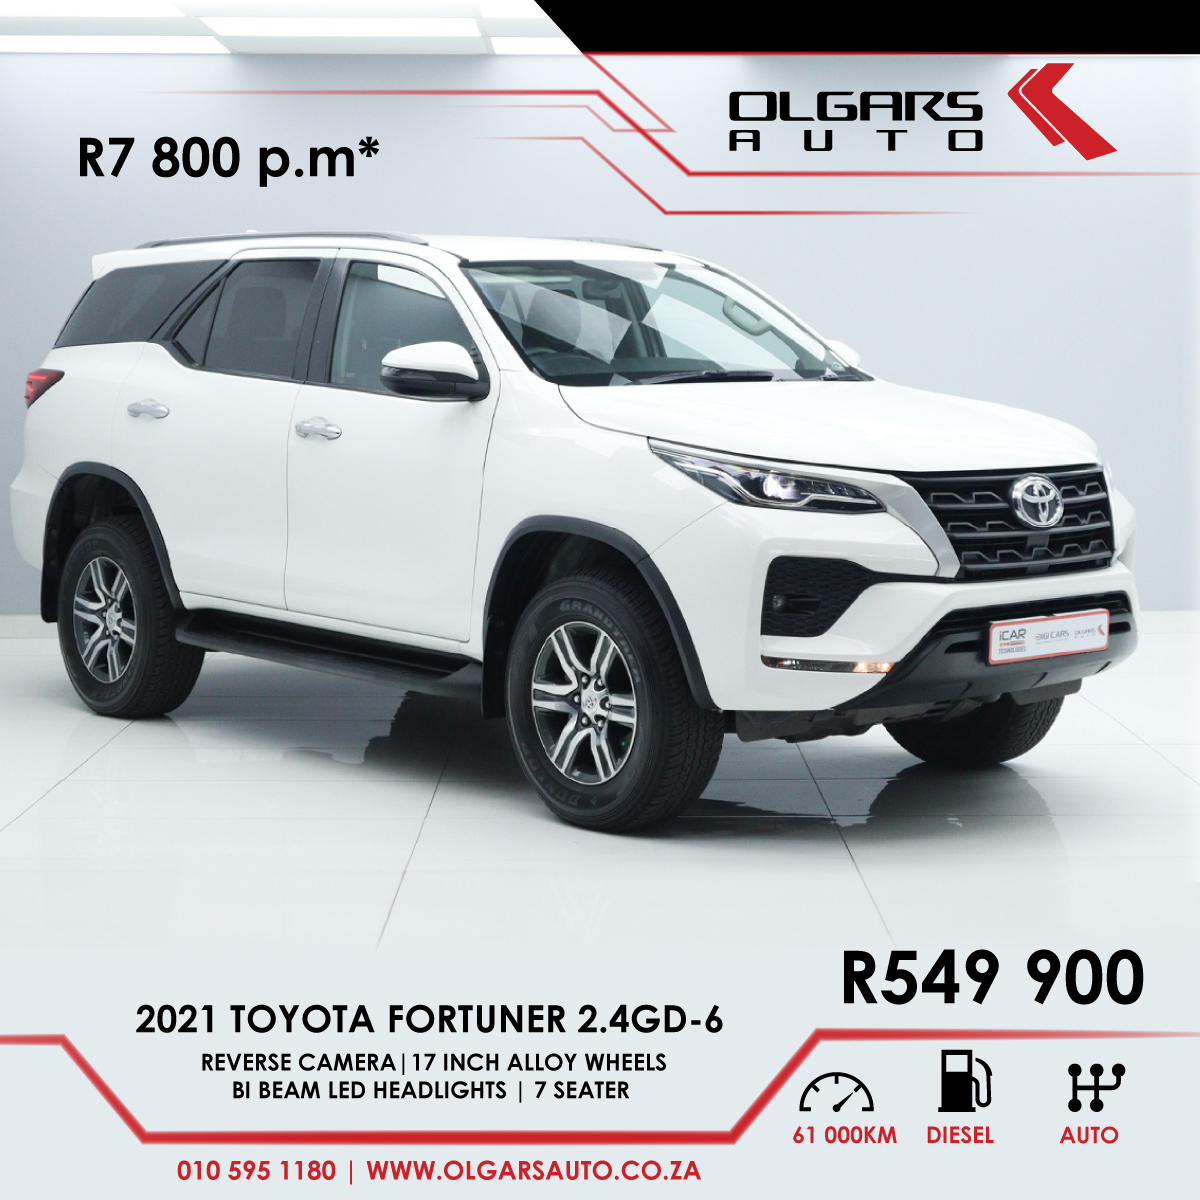 A wide variety of quality pre-owned cars are available immediately!!!
Visit our showroom at 168 Grayston Drive in Sandton to get your next set of wheels.

Nationwide Delivery.
olgarsauto.co.za
T’s & C’s Apply.
#olgarsauto  #carsforsale #caroftheday #affordablecars #buyacar